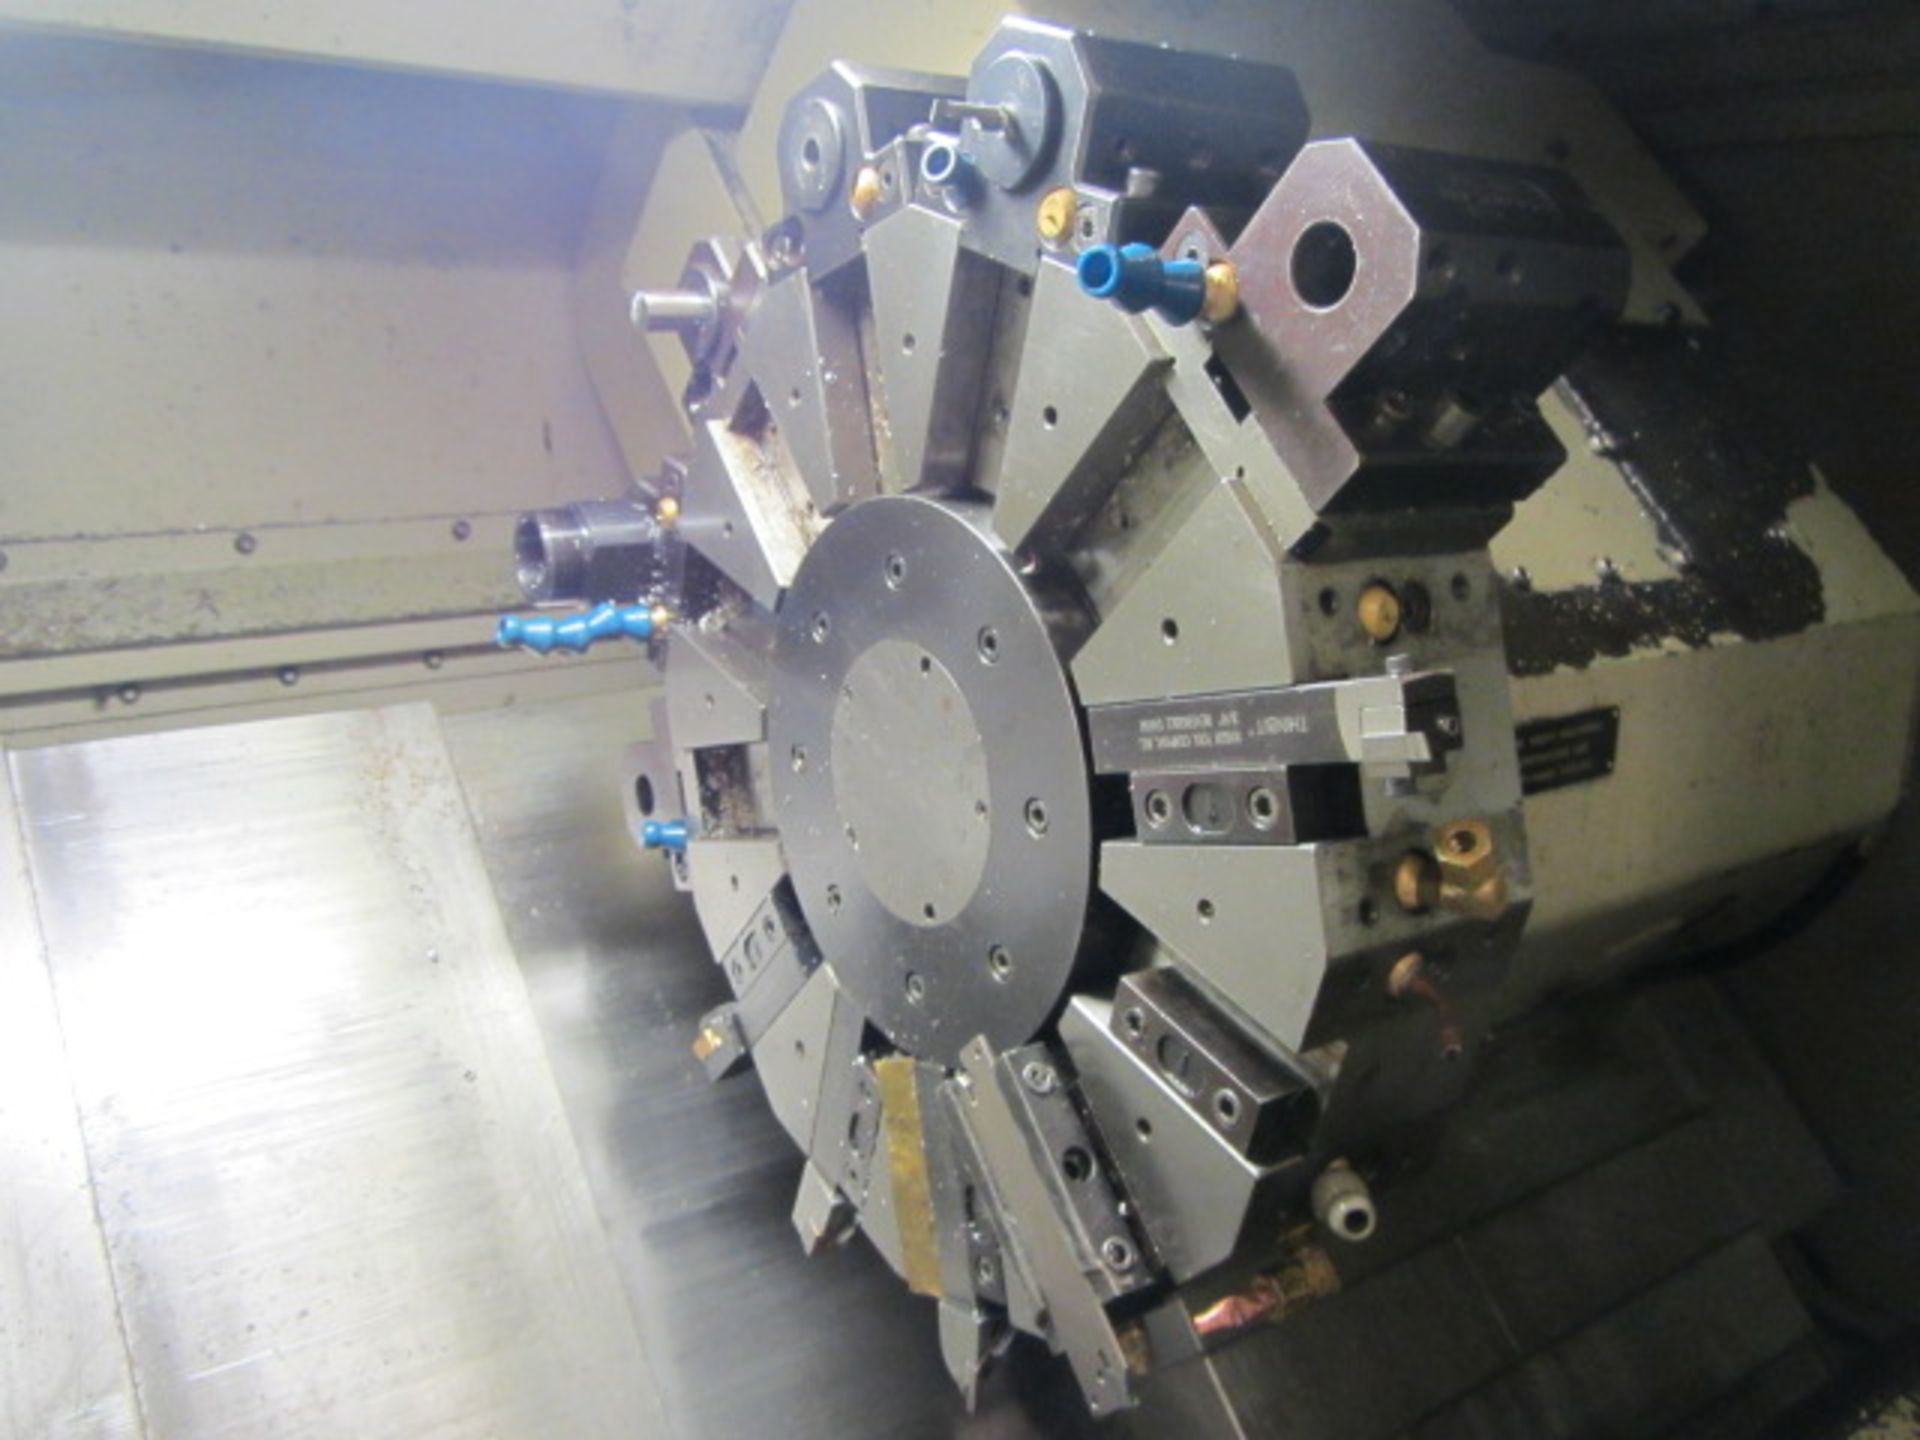 Hardinge Conquest T42 CNC Turning Center with 6'' Chuck, Collet Spindle Nose, Spindle Speeds to 5000 - Image 4 of 9